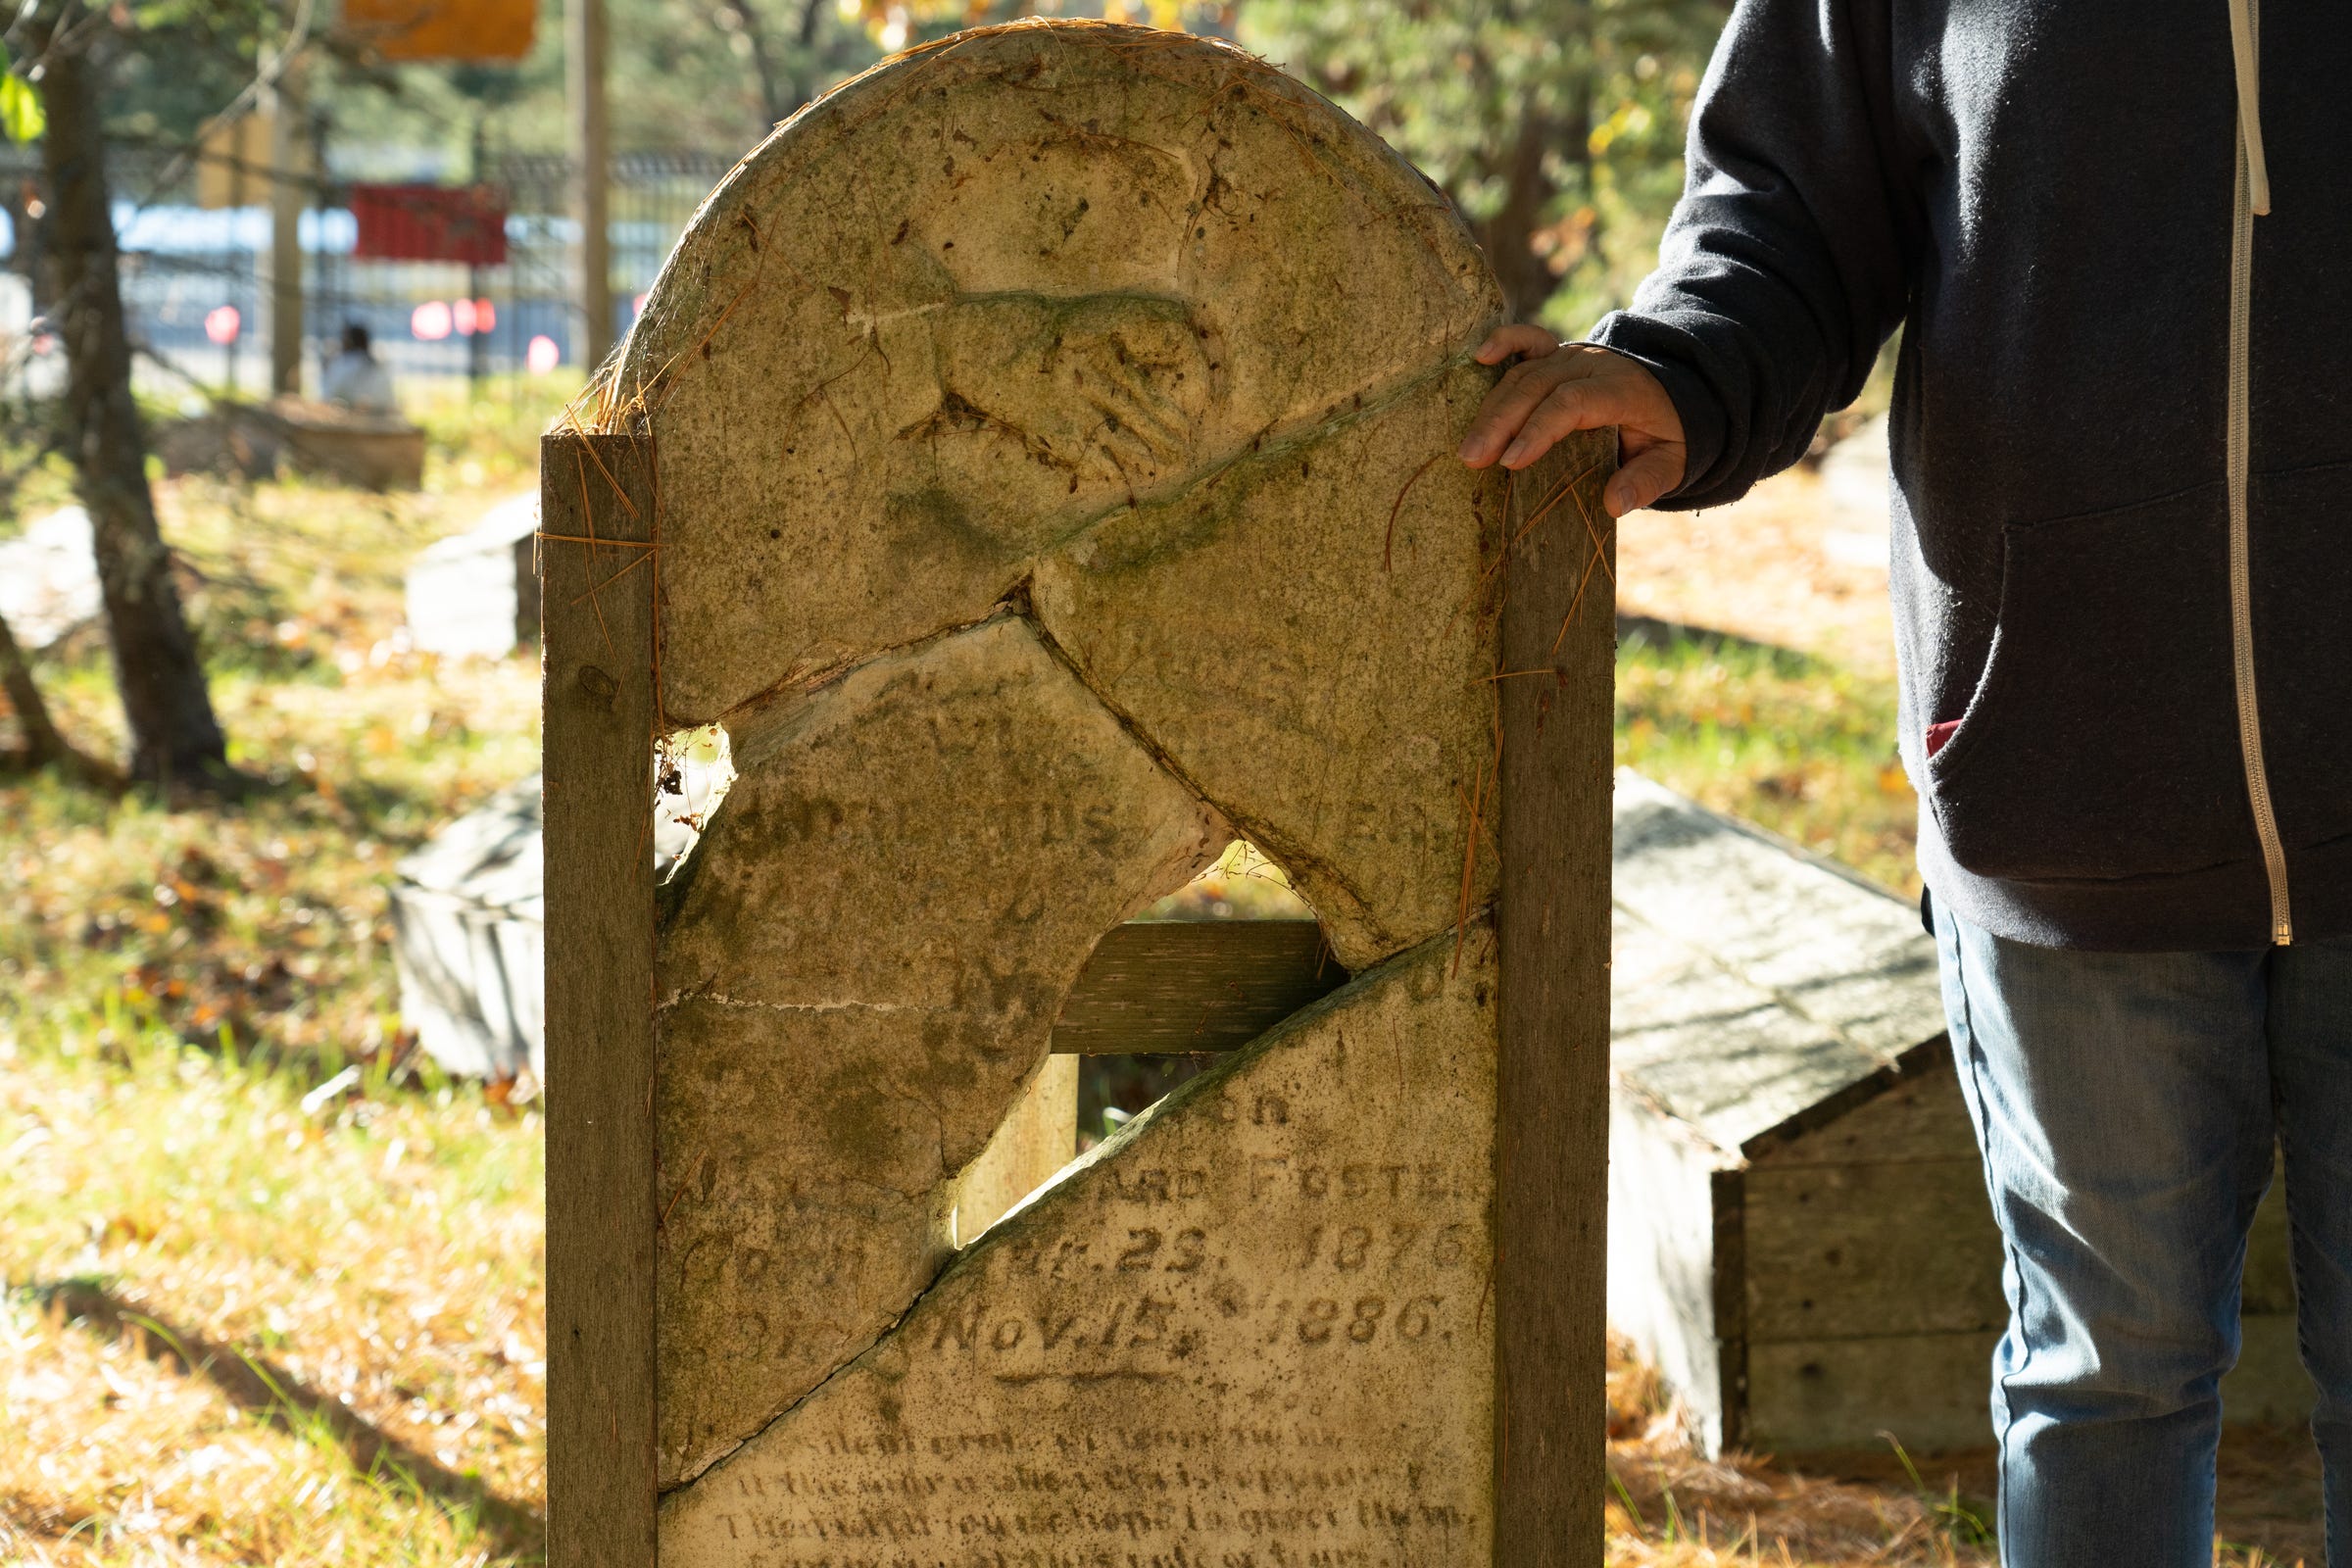 Wanda Perron, 73, of Bay Mills Township, rests her hand on a tombstone that had crumbled but was reassembled inside the Old Indian Burial Ground in Bay Mills Township on Monday, Oct. 18, 2021.